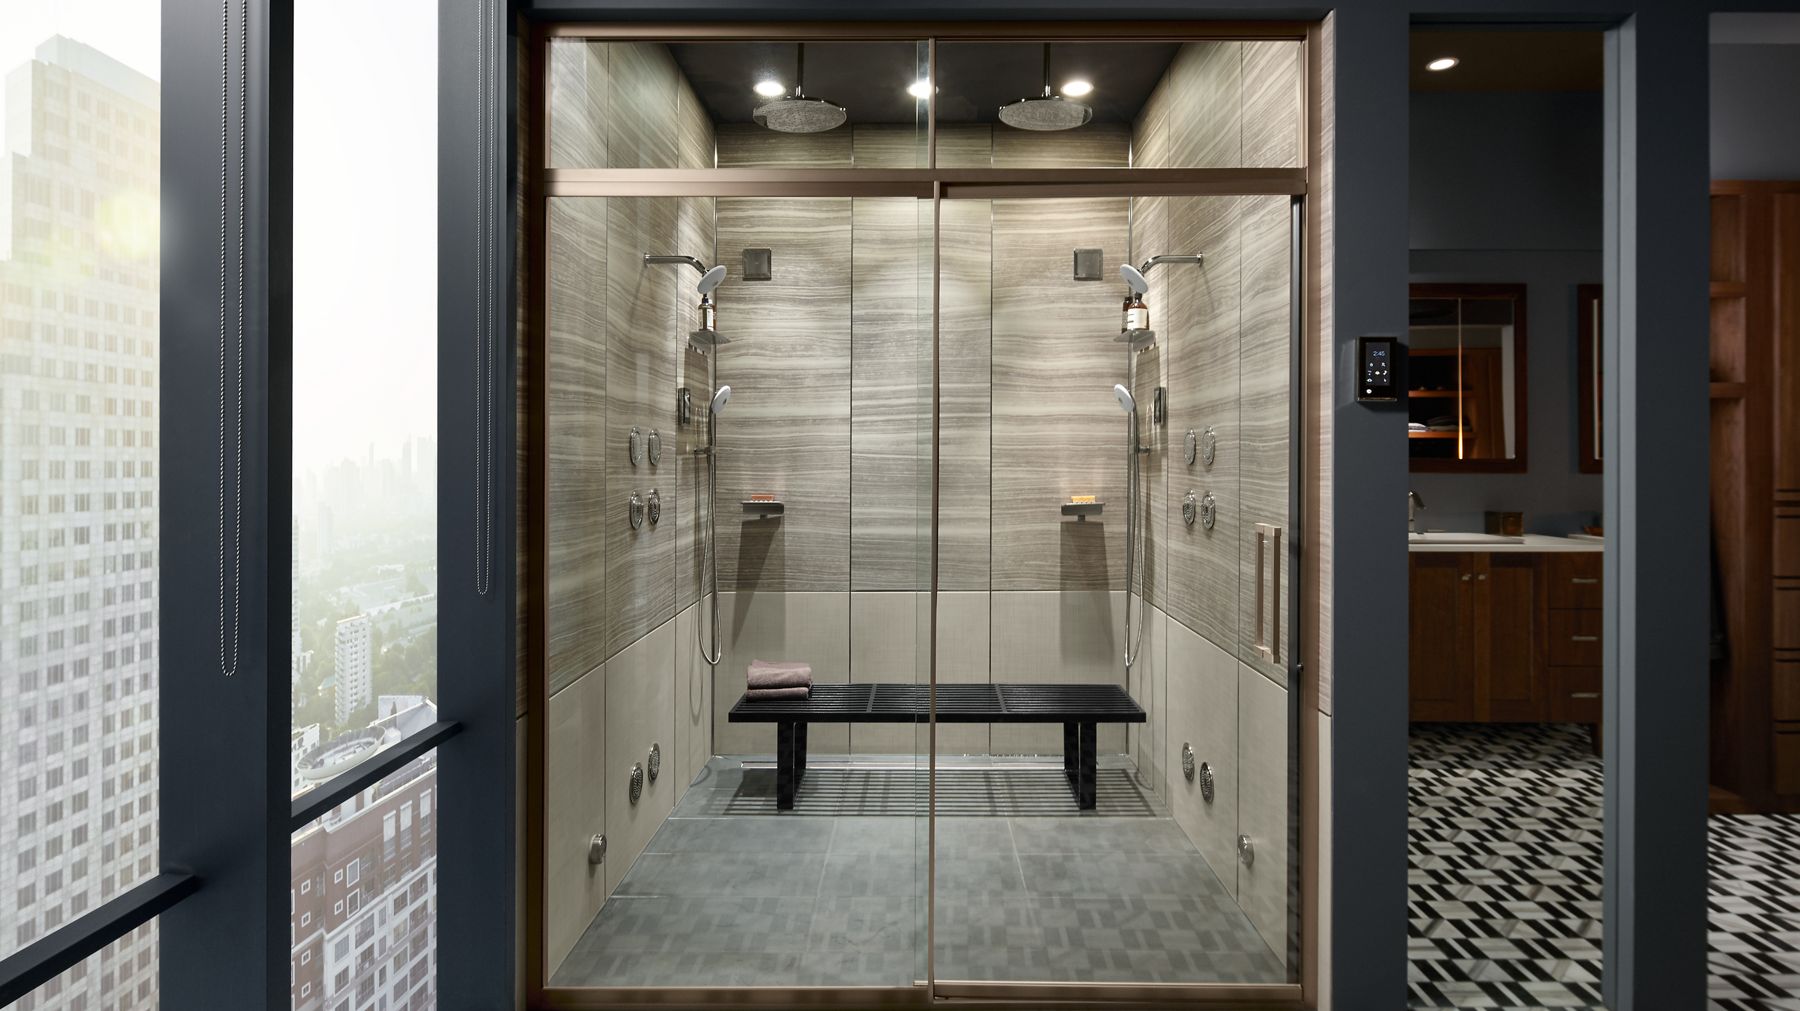 Showering Space Considerations